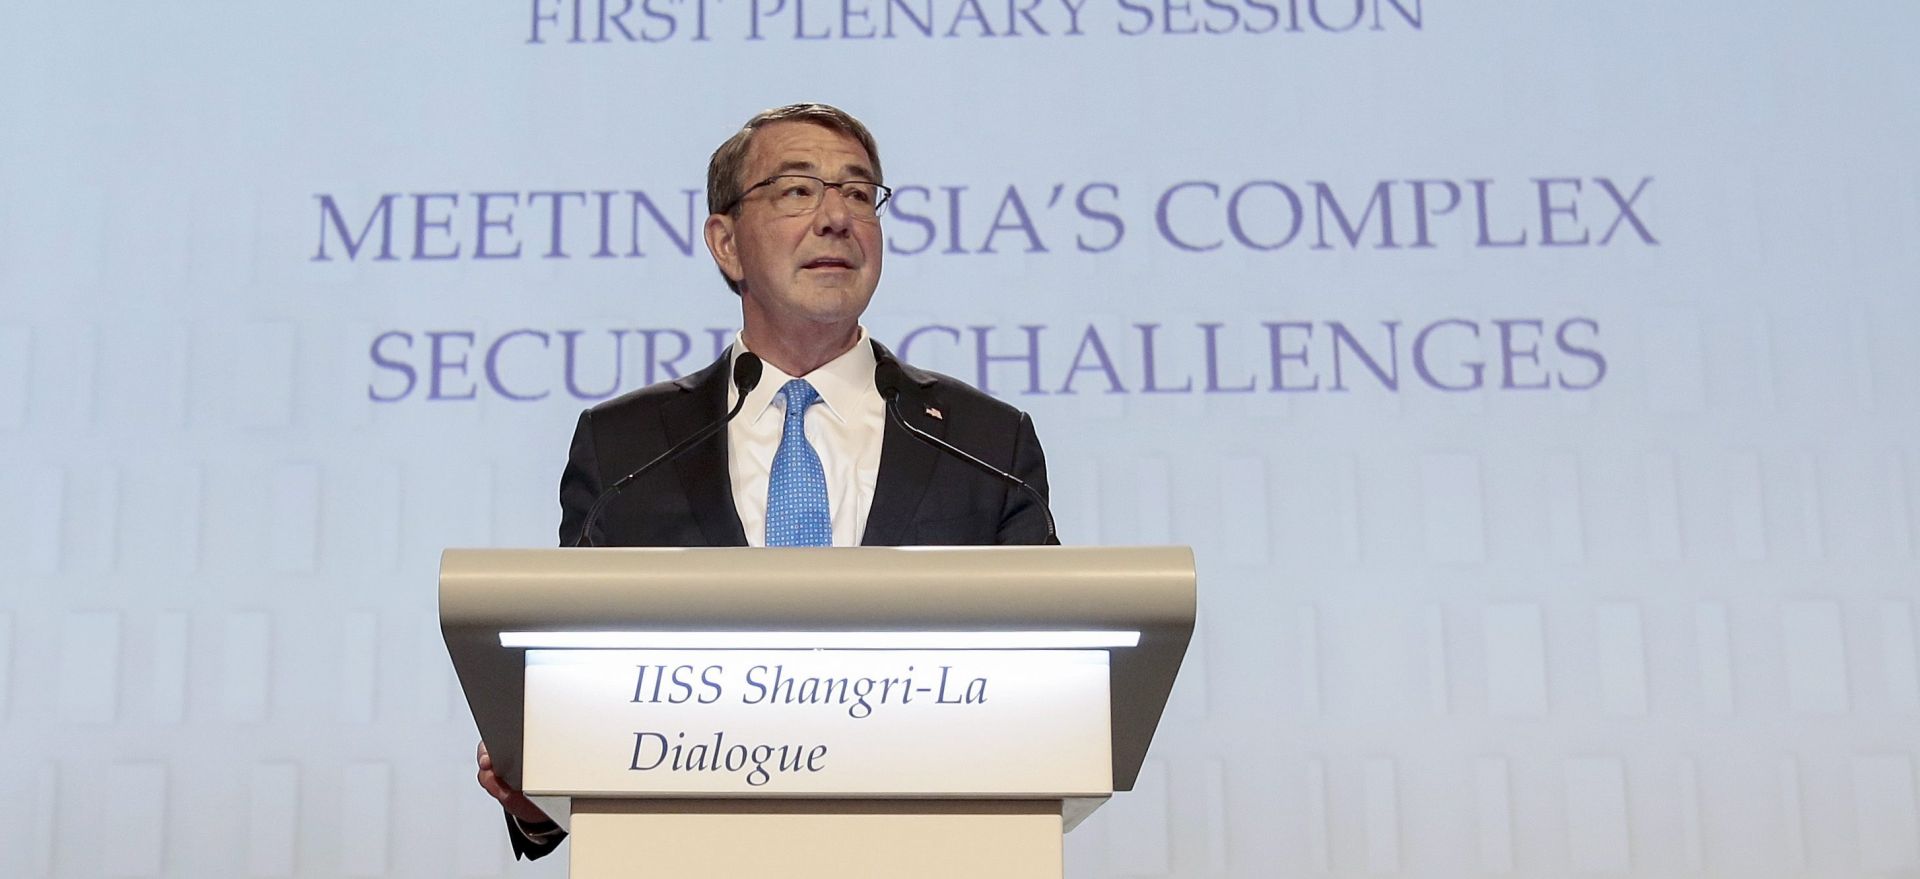 epa05344916 US Secretary of Defense Ashton Carter delivers his speech during the First Plenary Session of the International Institute for Strategic Studies (IISS) 15th Asia Security Summit in Singapore, 04 June 2016. The IISS Asia Security Summit is an annual gathering of defense officials in the Asia-Pacific region and is dubbed the Shangri-La Dialogue in honor of the hotel where the event is held. The summit will run from 03 to 05 June 2016.  EPA/WALLACE WOON